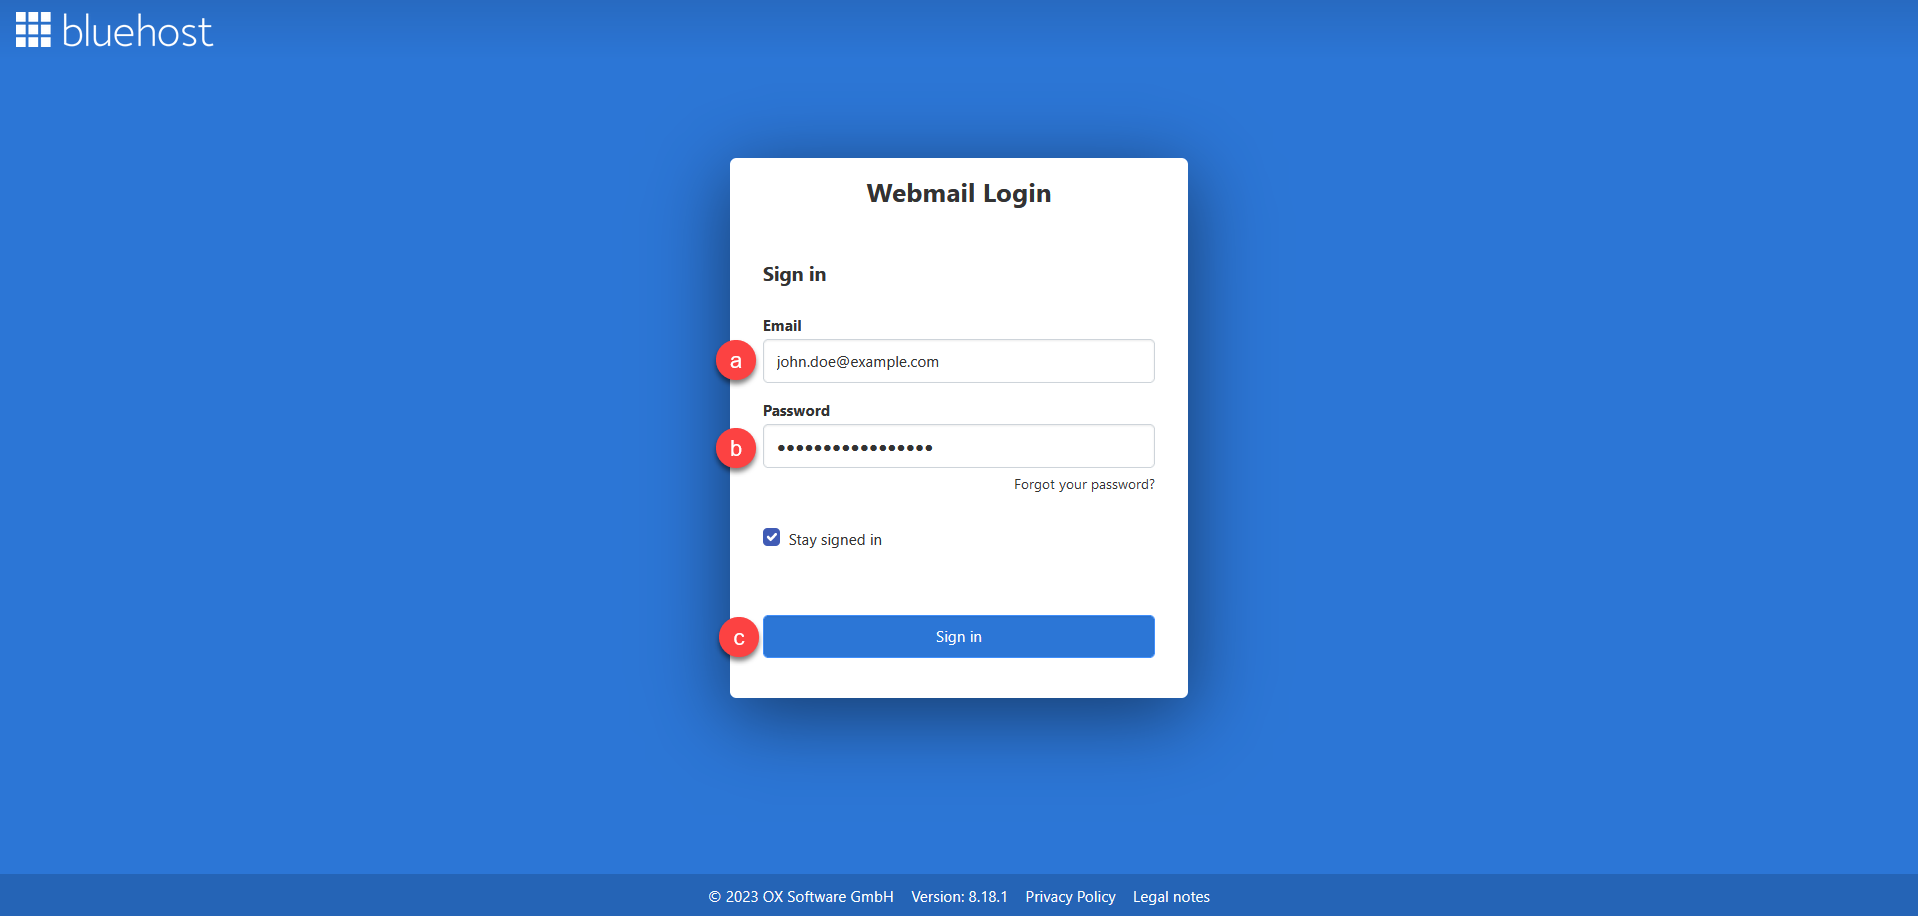 Bluehost Cloud Mail Login page